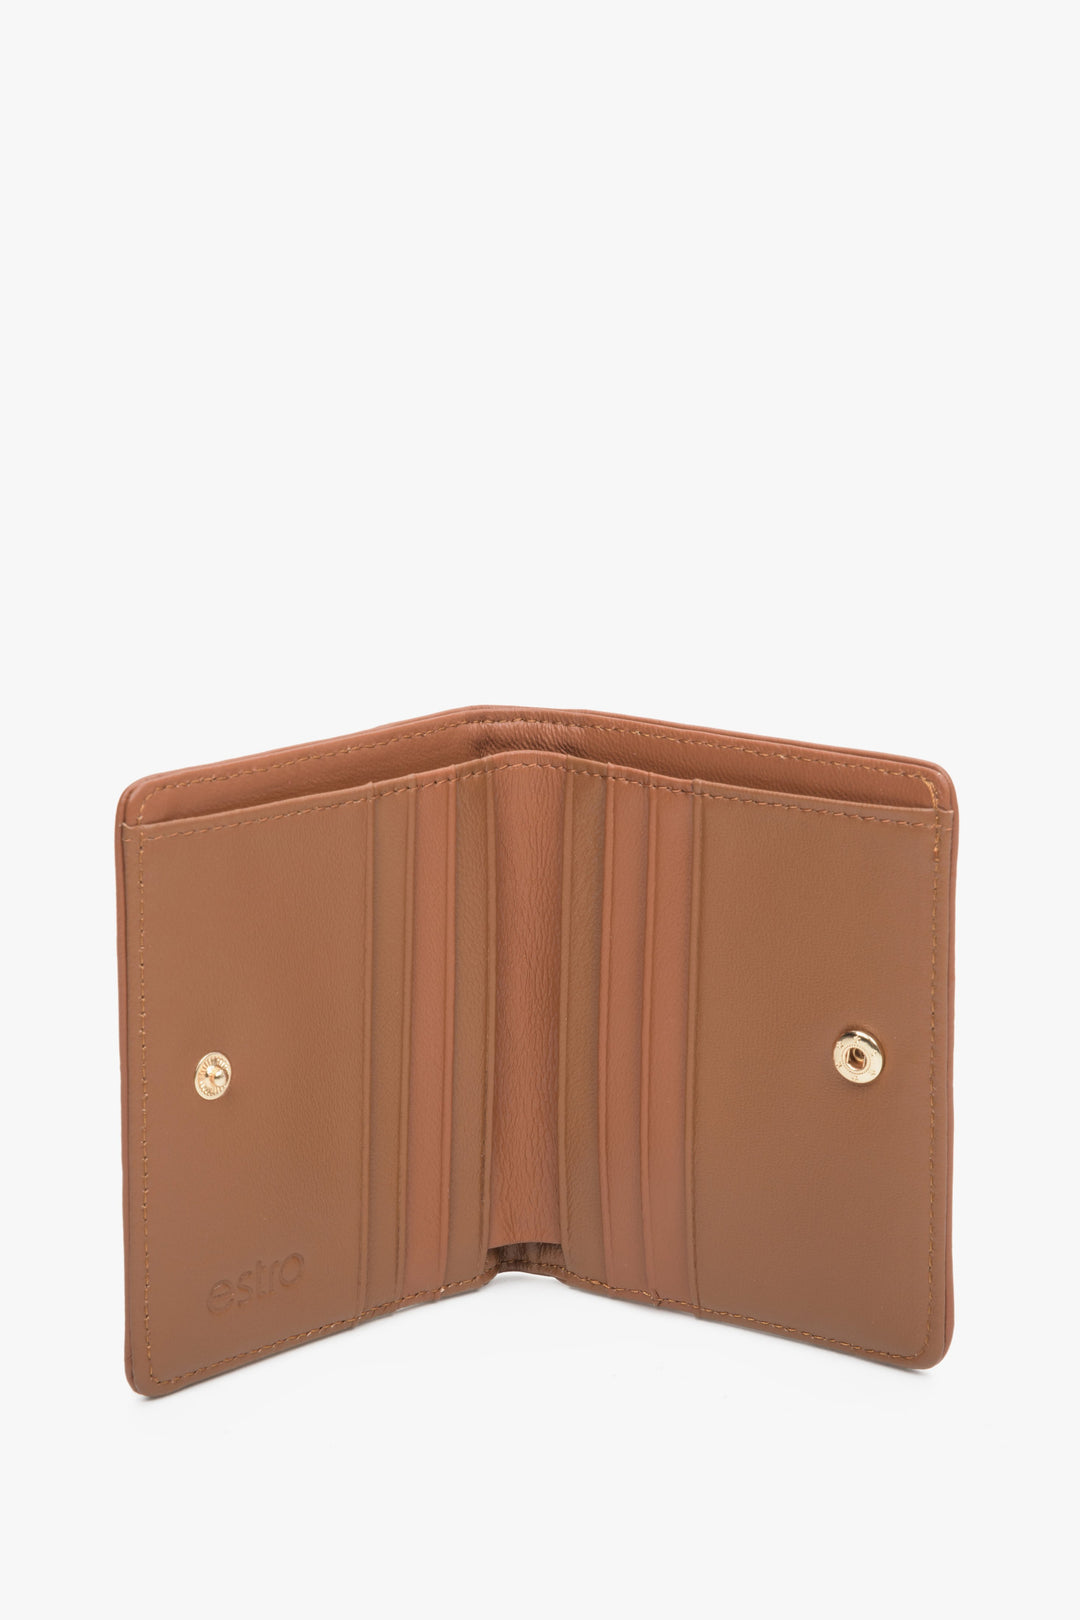 Small women's brown card wallet by Estro made of genuine leather - interior view of the model.